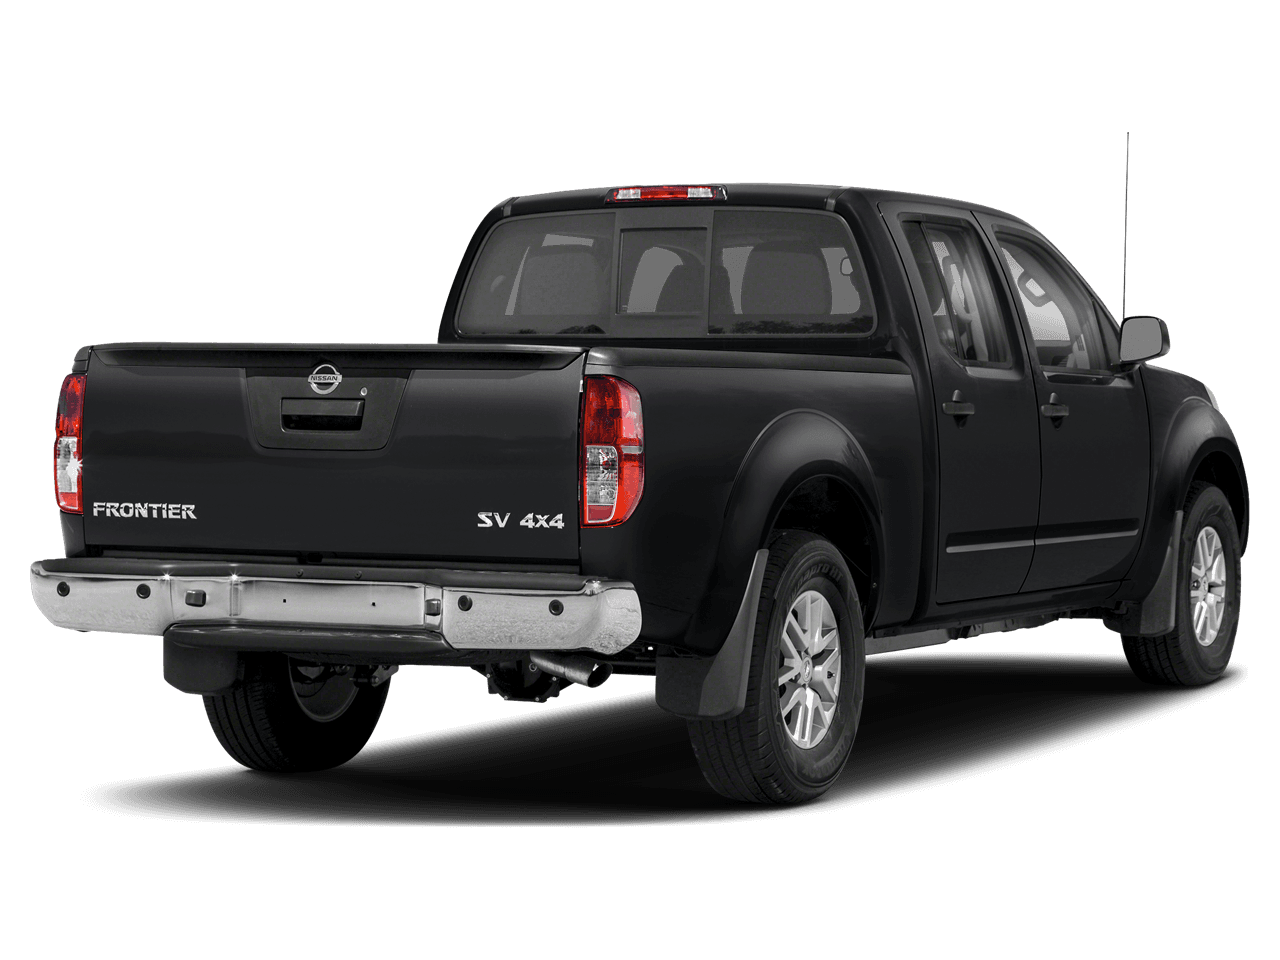 2019 Nissan Frontier Photo in Mount Vernon, OH 43050